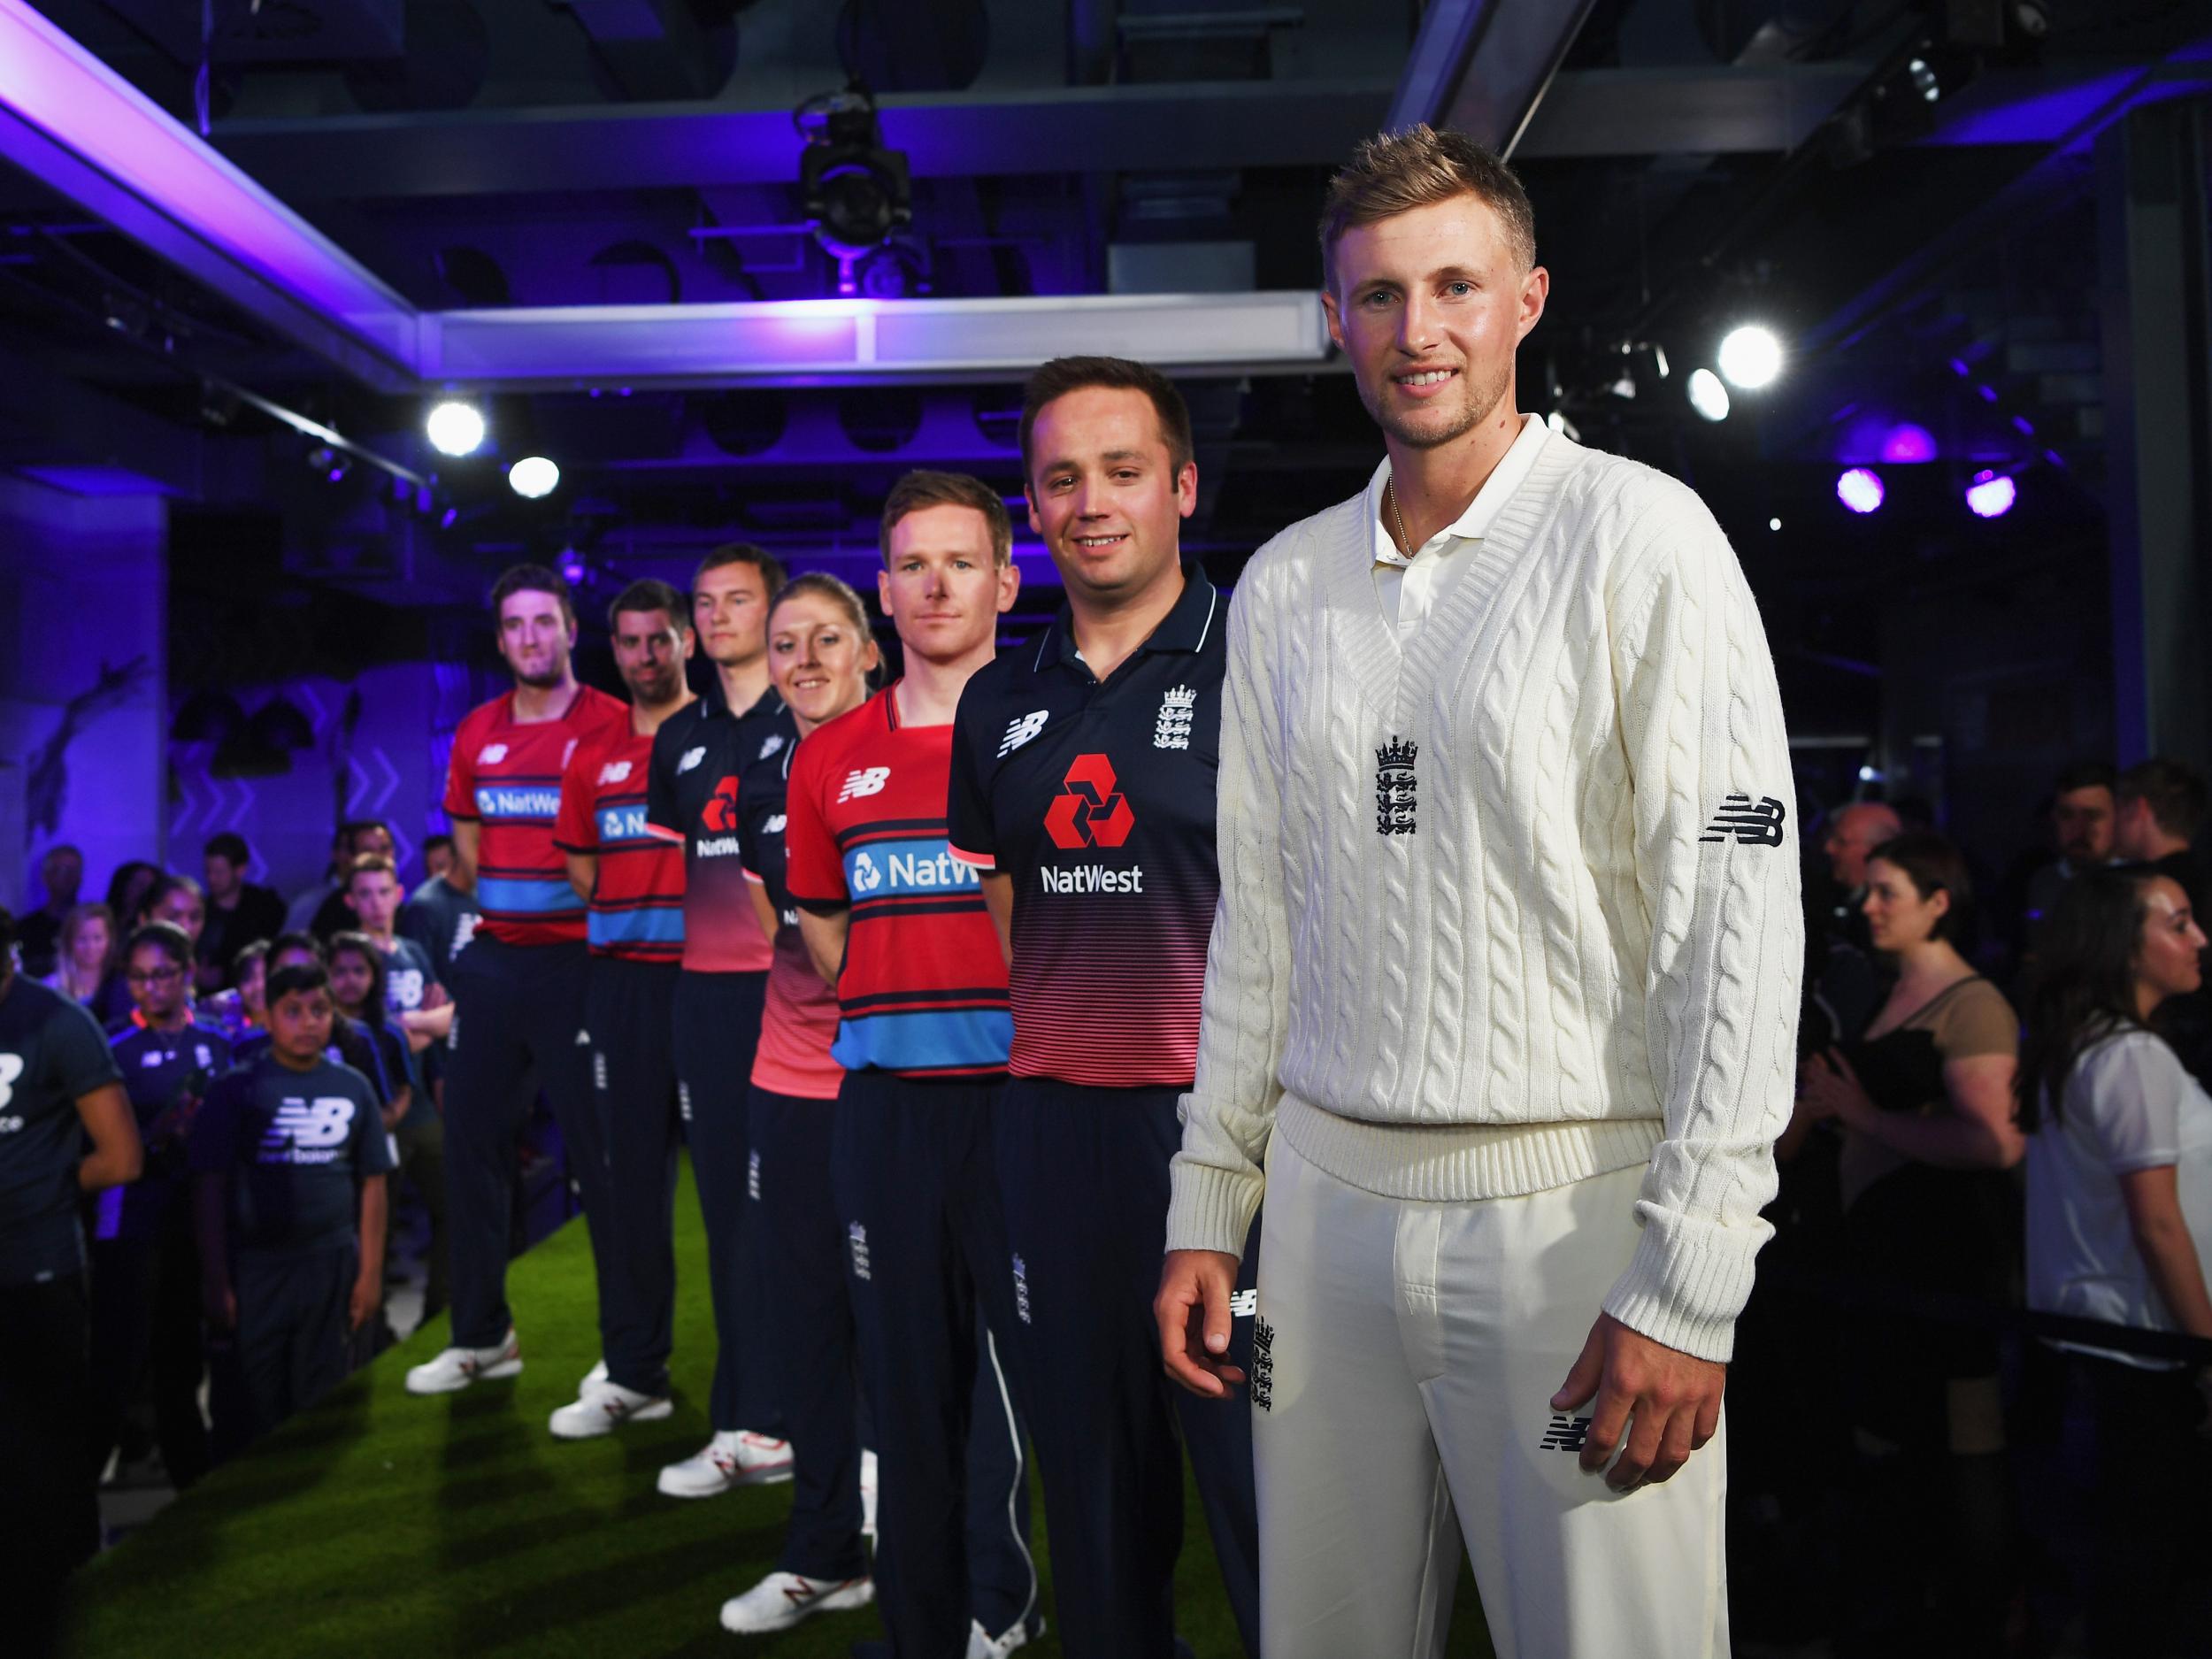 Root was modelling the new Test kit, while the new ODI and T20 kits were also launched